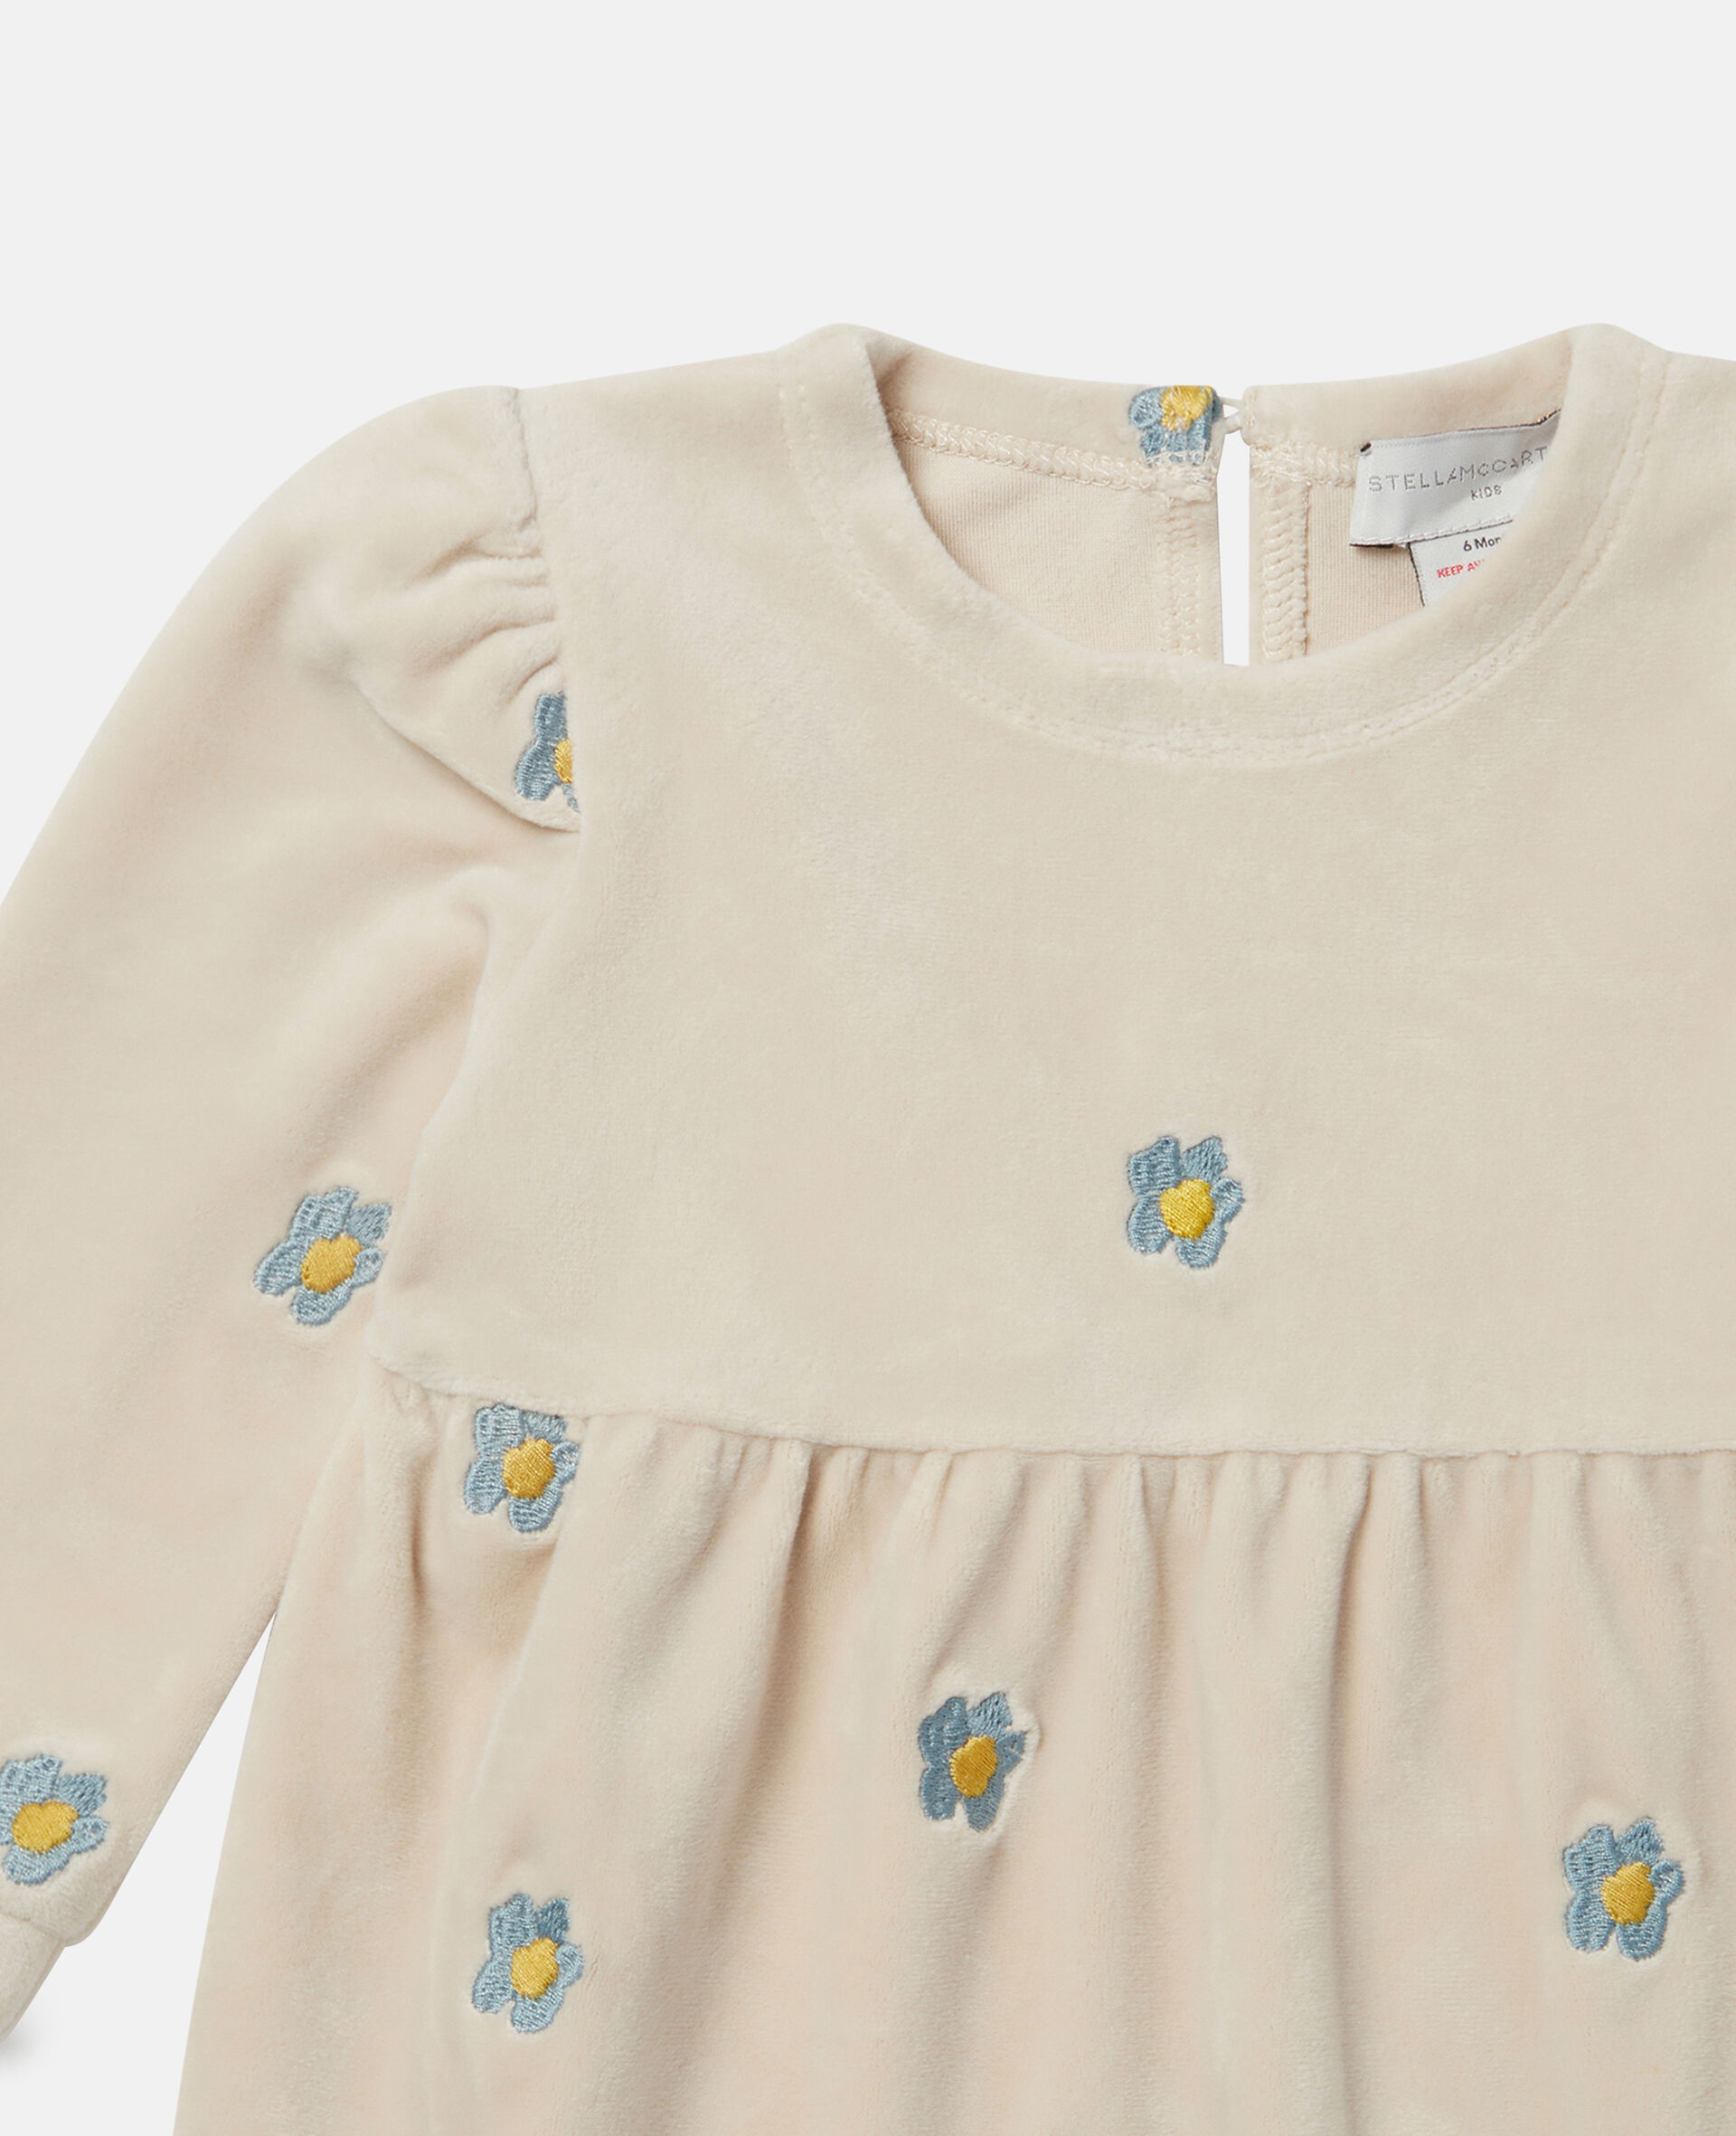 Daisy Embroidered Velour Fleece Dress-Beige-large image number 1